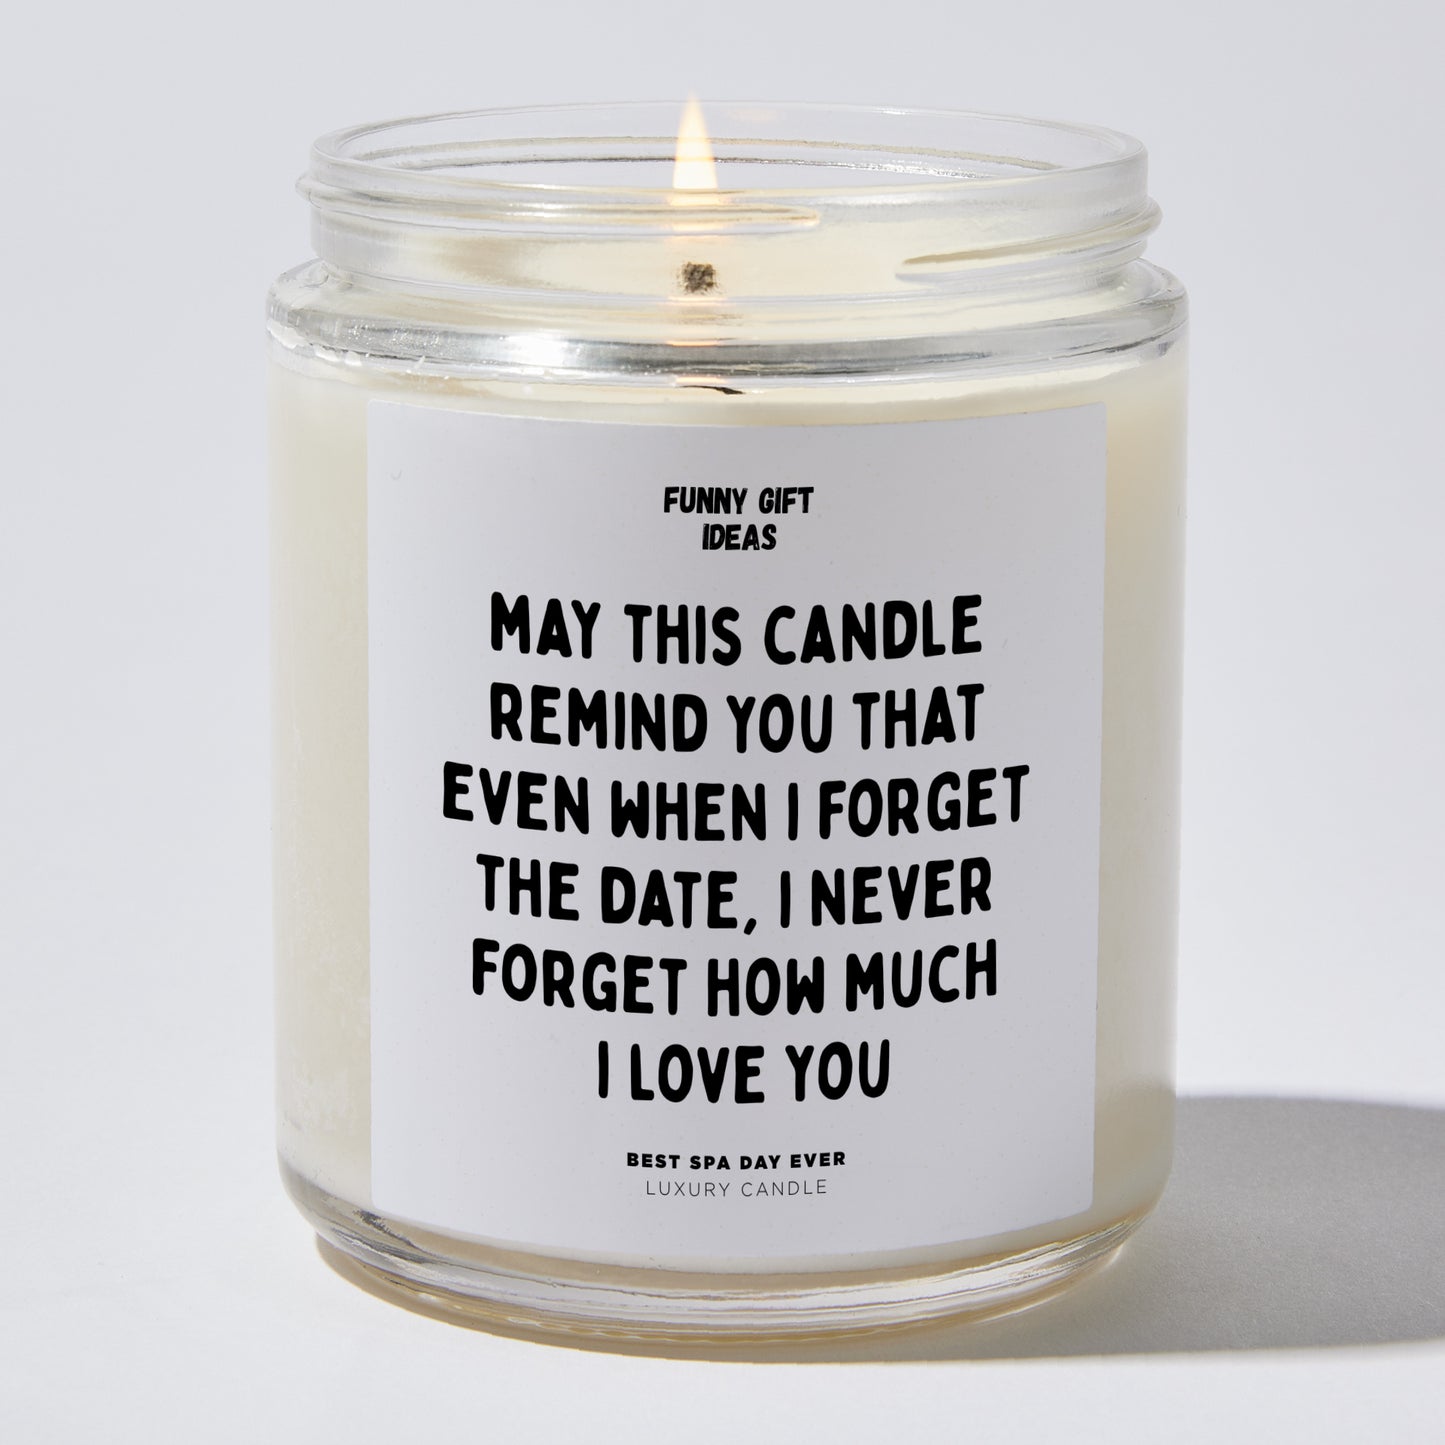 Anniversary Present - May This Candle Remind You That Even When I Forget the Date, I Never Forget How Much I Love You - Candle